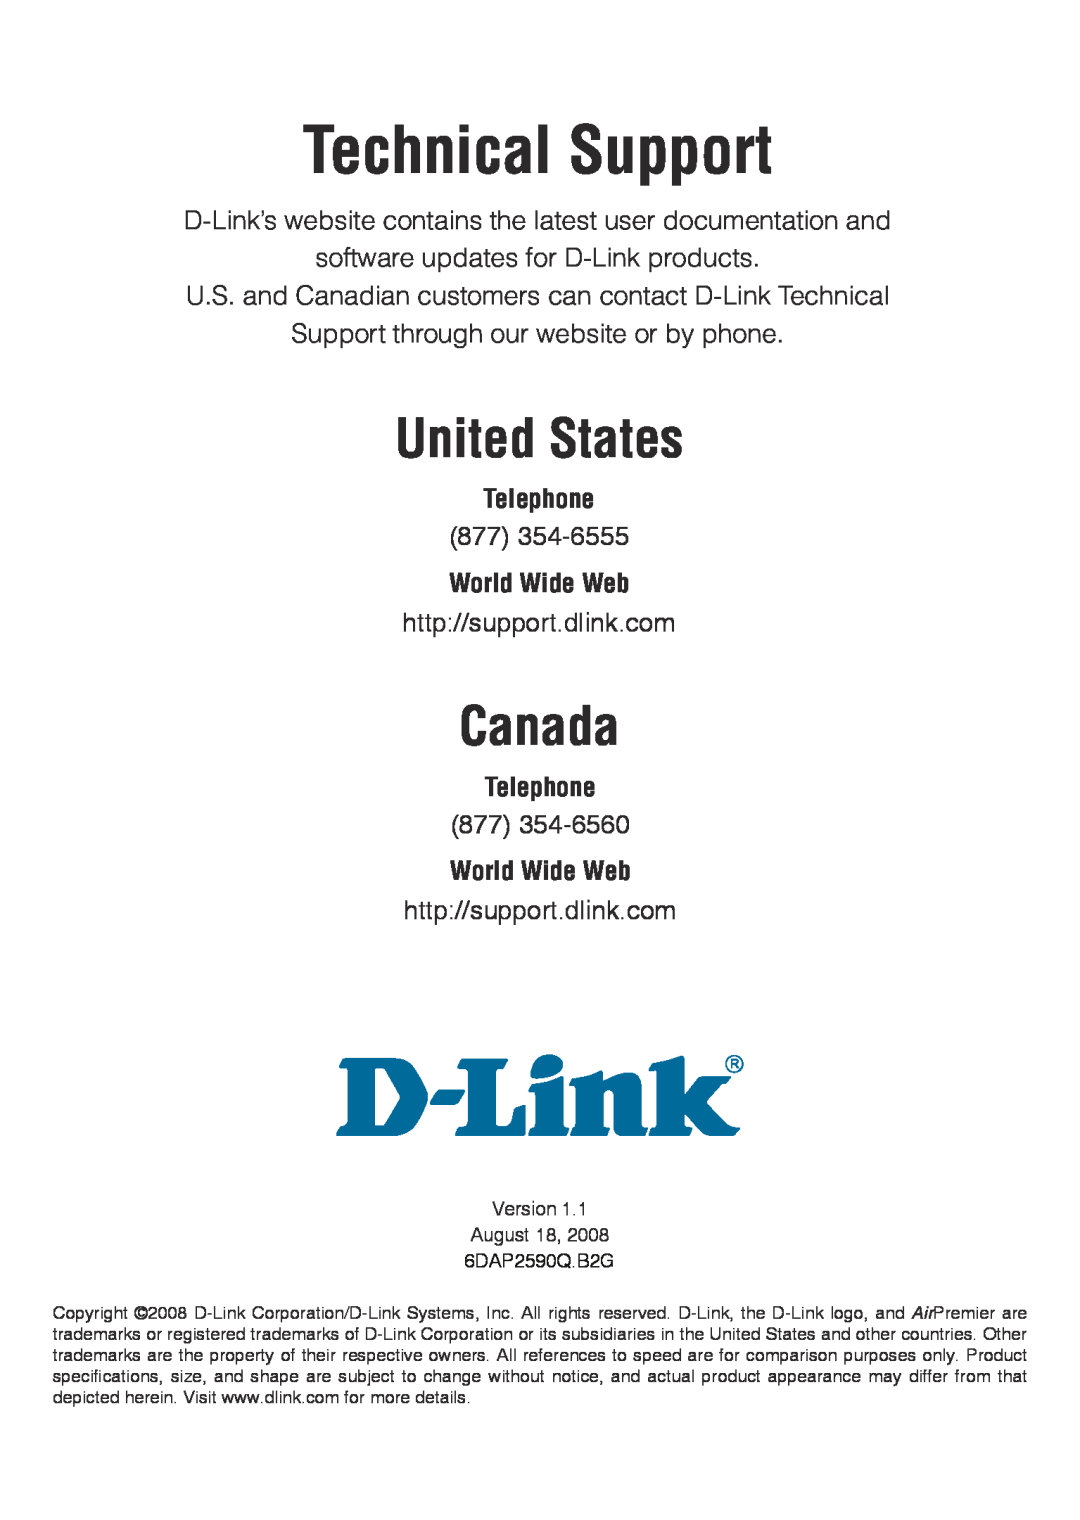 D-Link DAP-2590 Technical Support, United States, Canada, D-Link’s website contains the latest user documentation and 